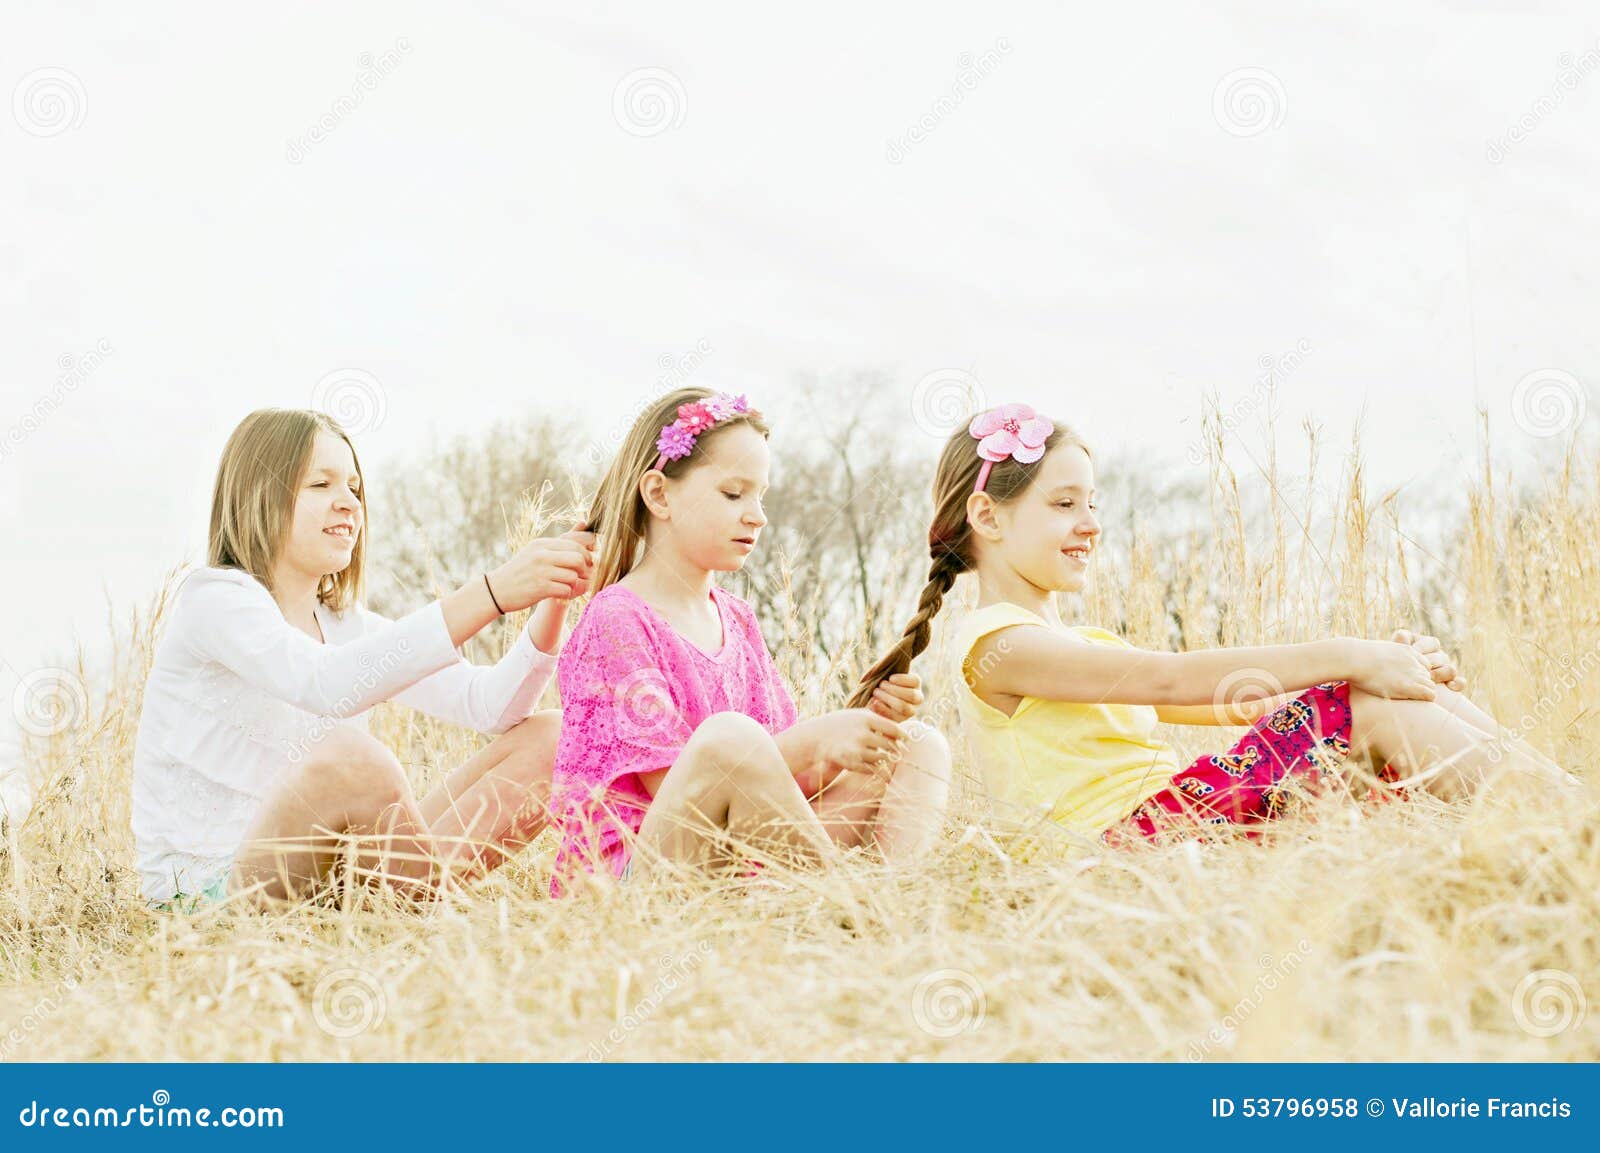 Girls Braiding Hair In Country Meadow Stock Photo Image Of Pretty Three 53796958